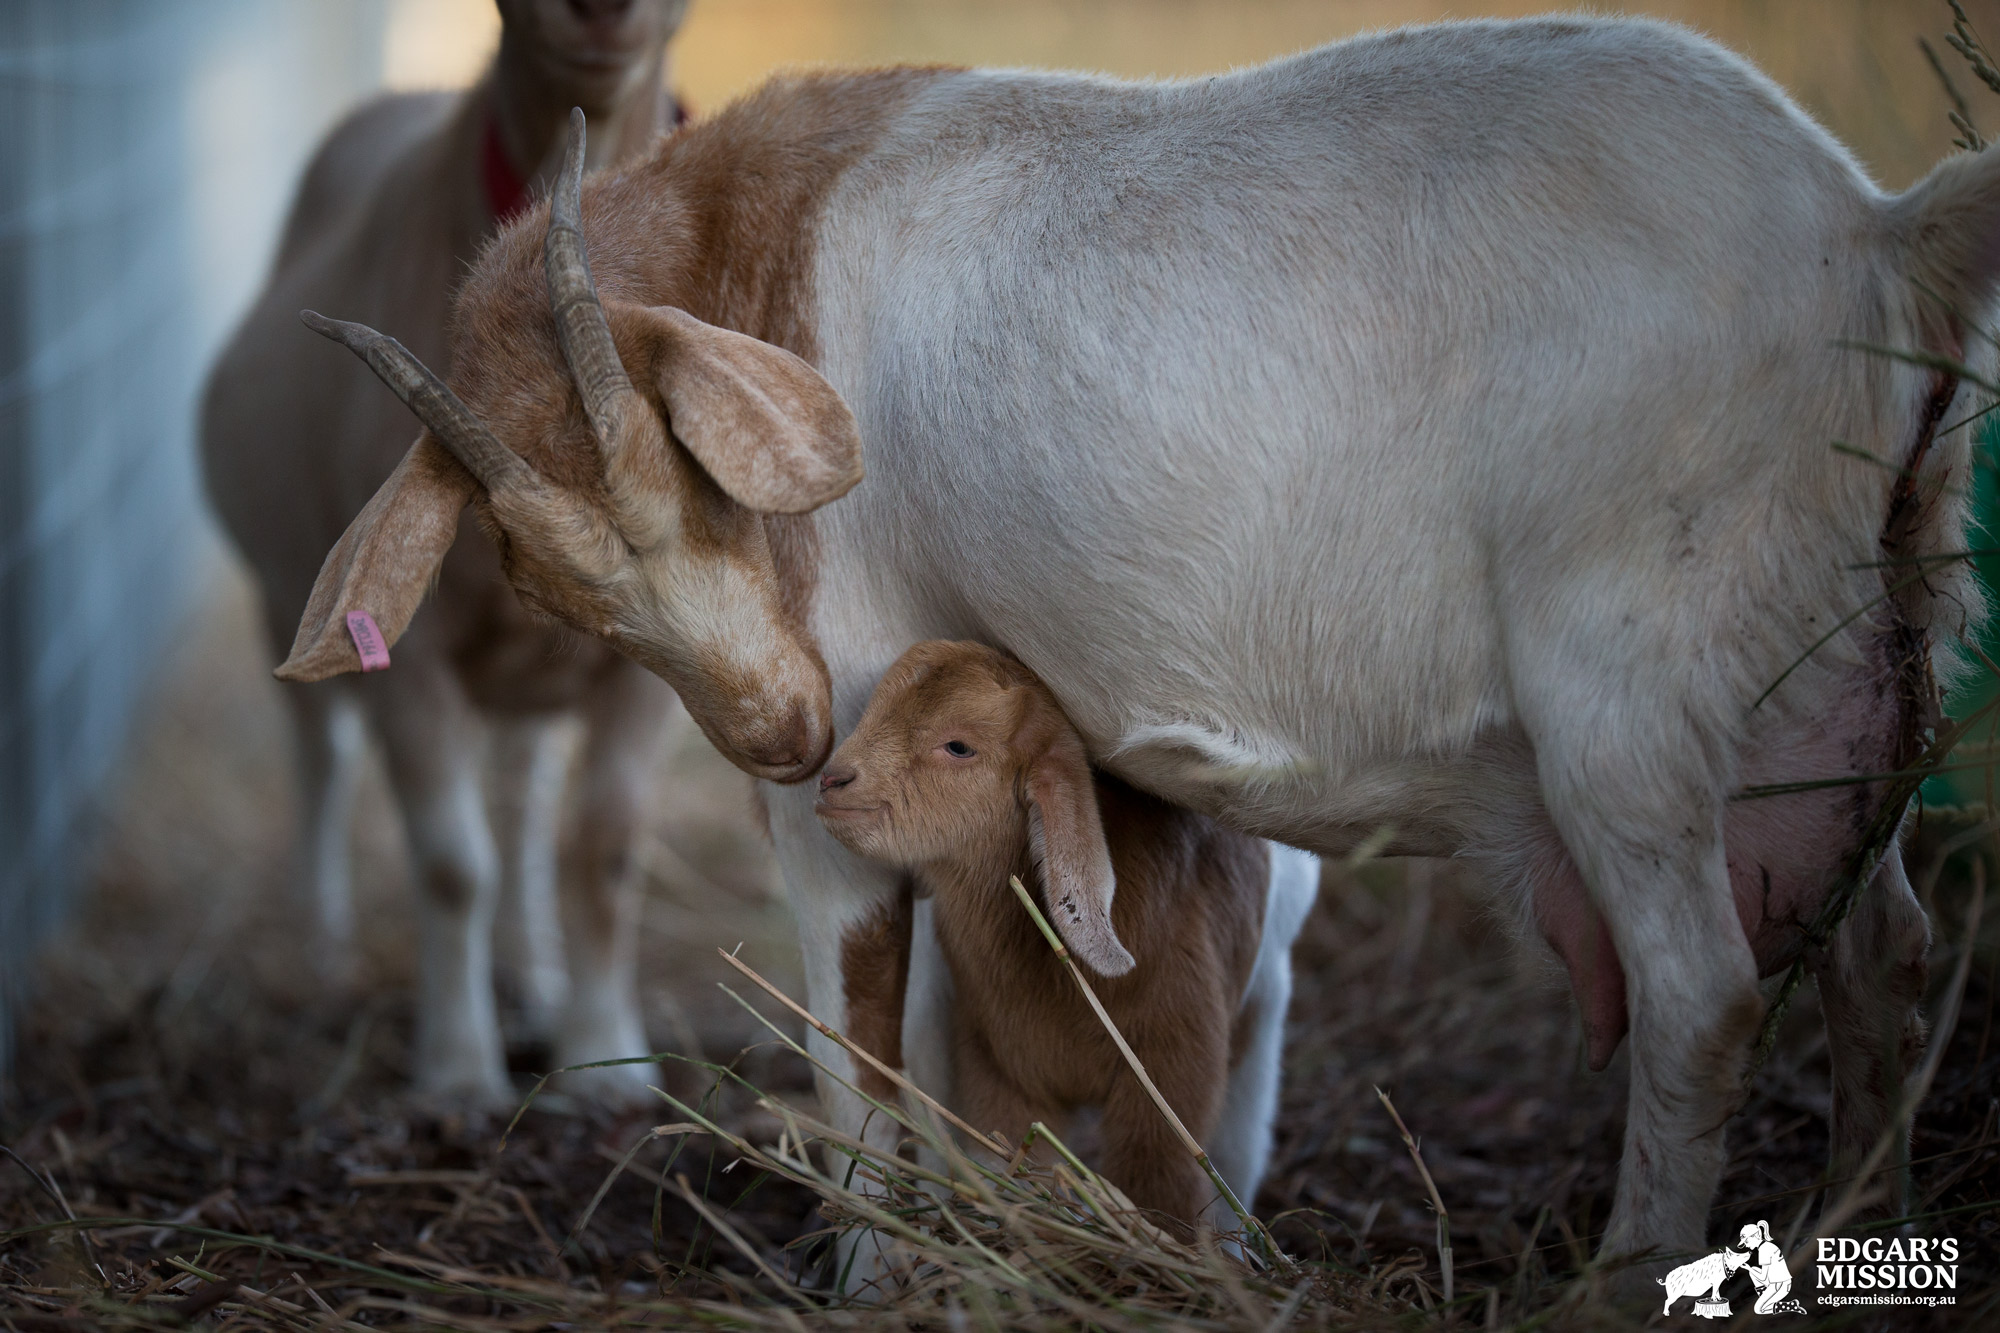 What We Can Learn About Parenting From Farm Animals